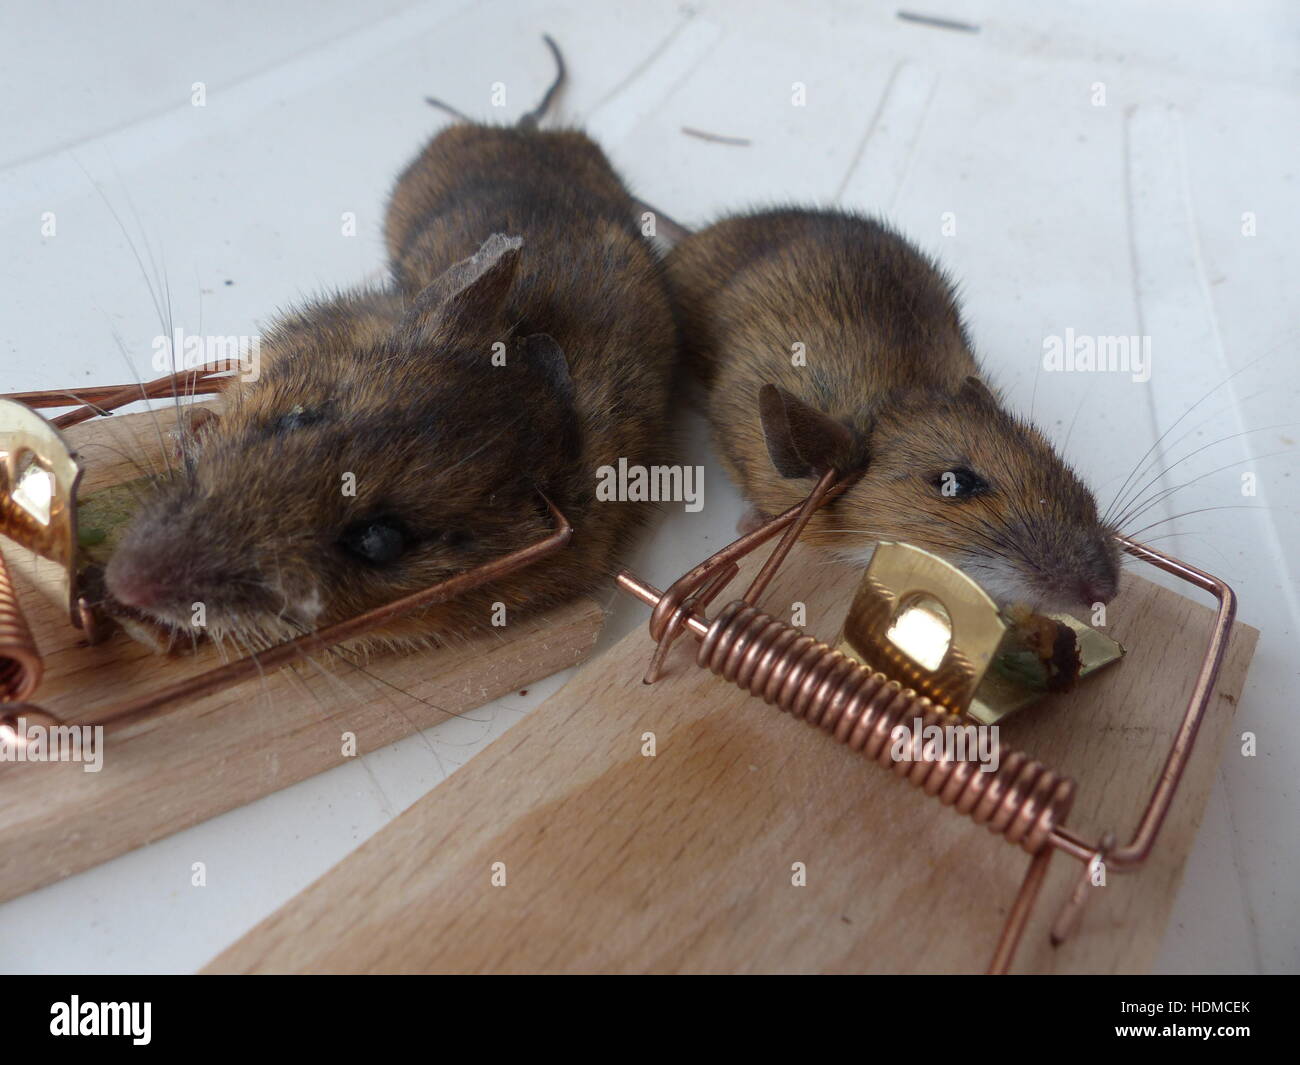 https://c8.alamy.com/comp/HDMCEK/mice-trapped-in-mouse-trap-HDMCEK.jpg